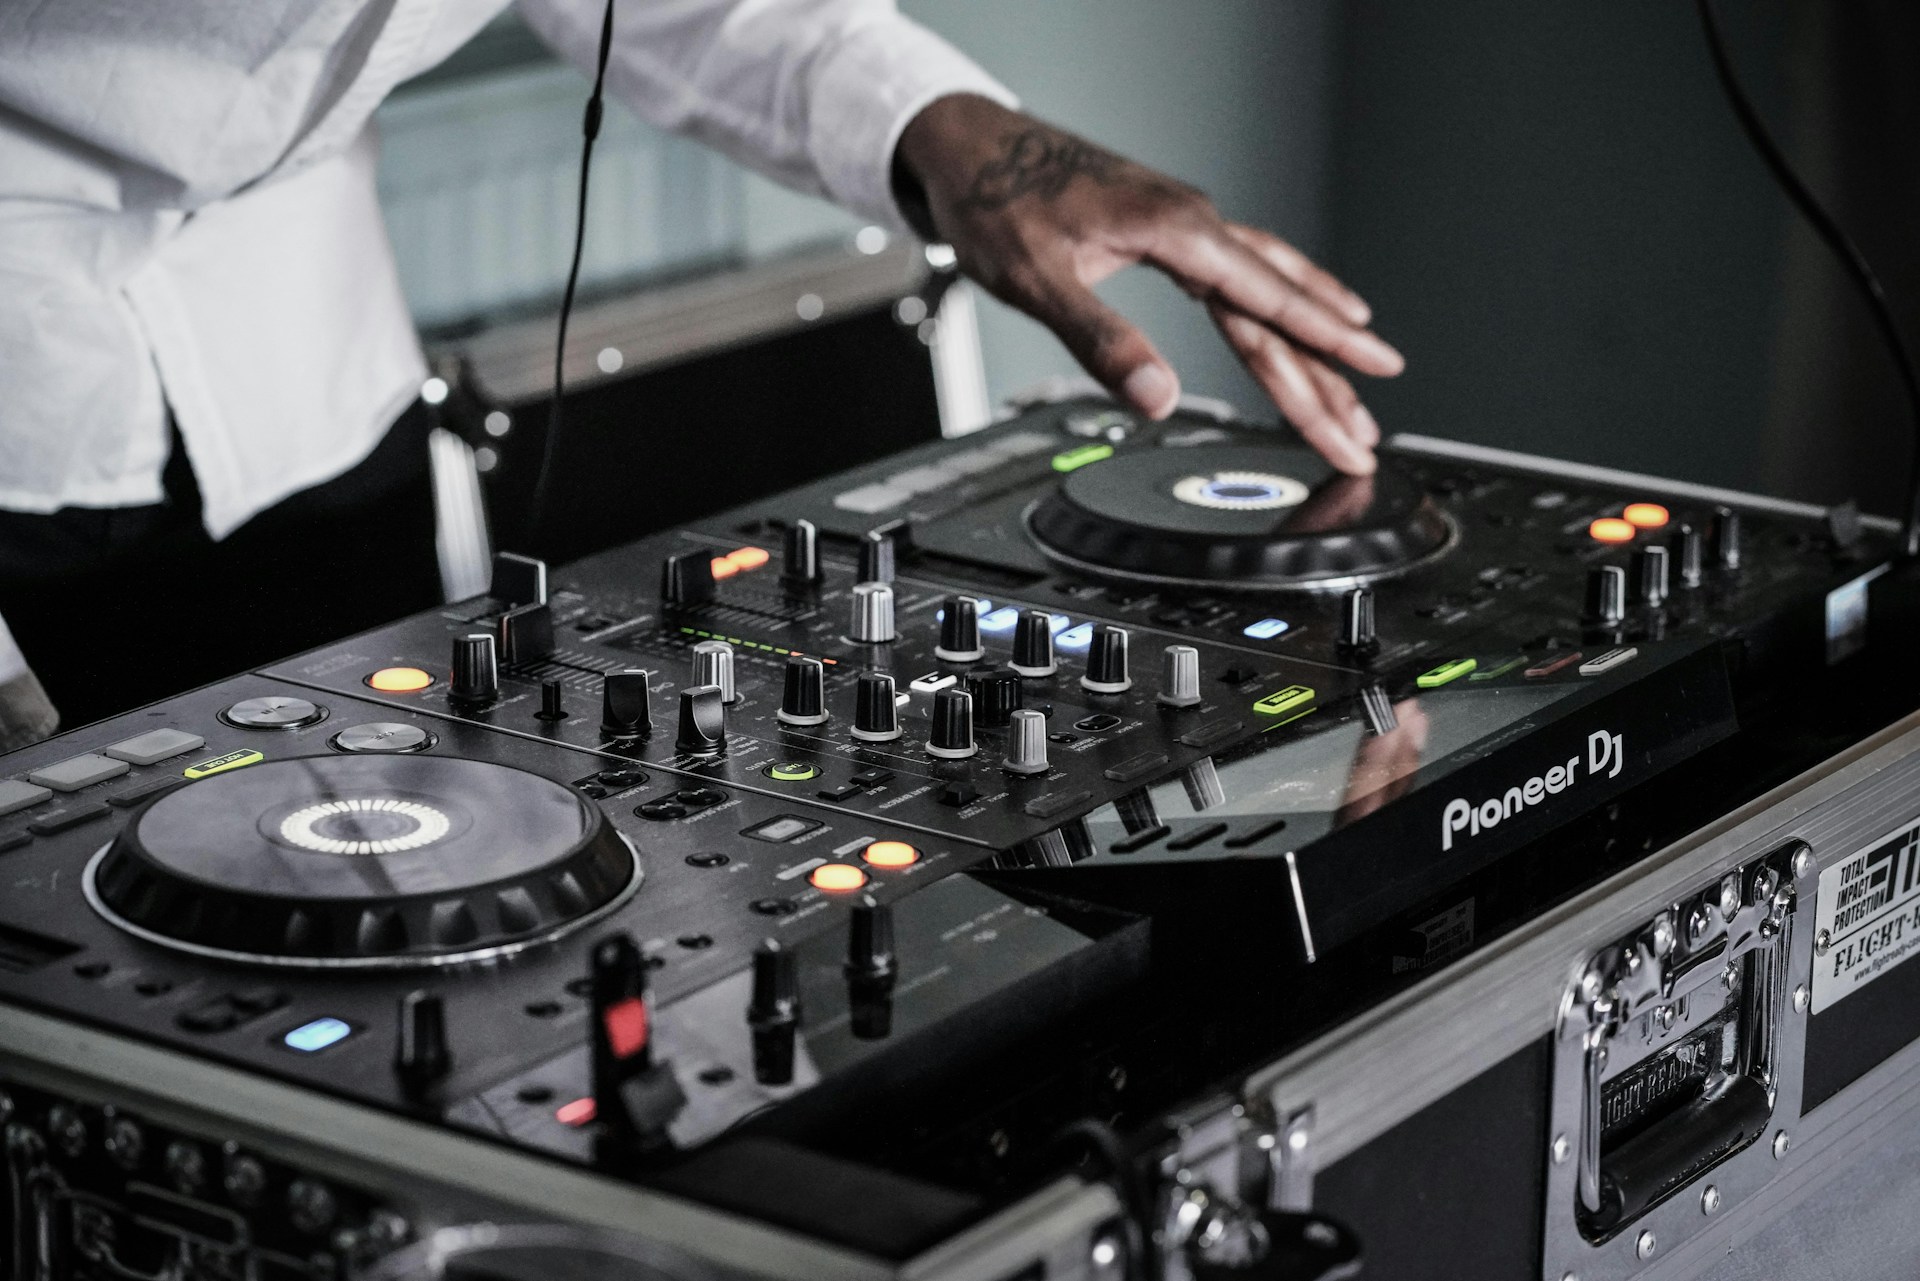 How do you clean your DJ equipment? The ultimate guide